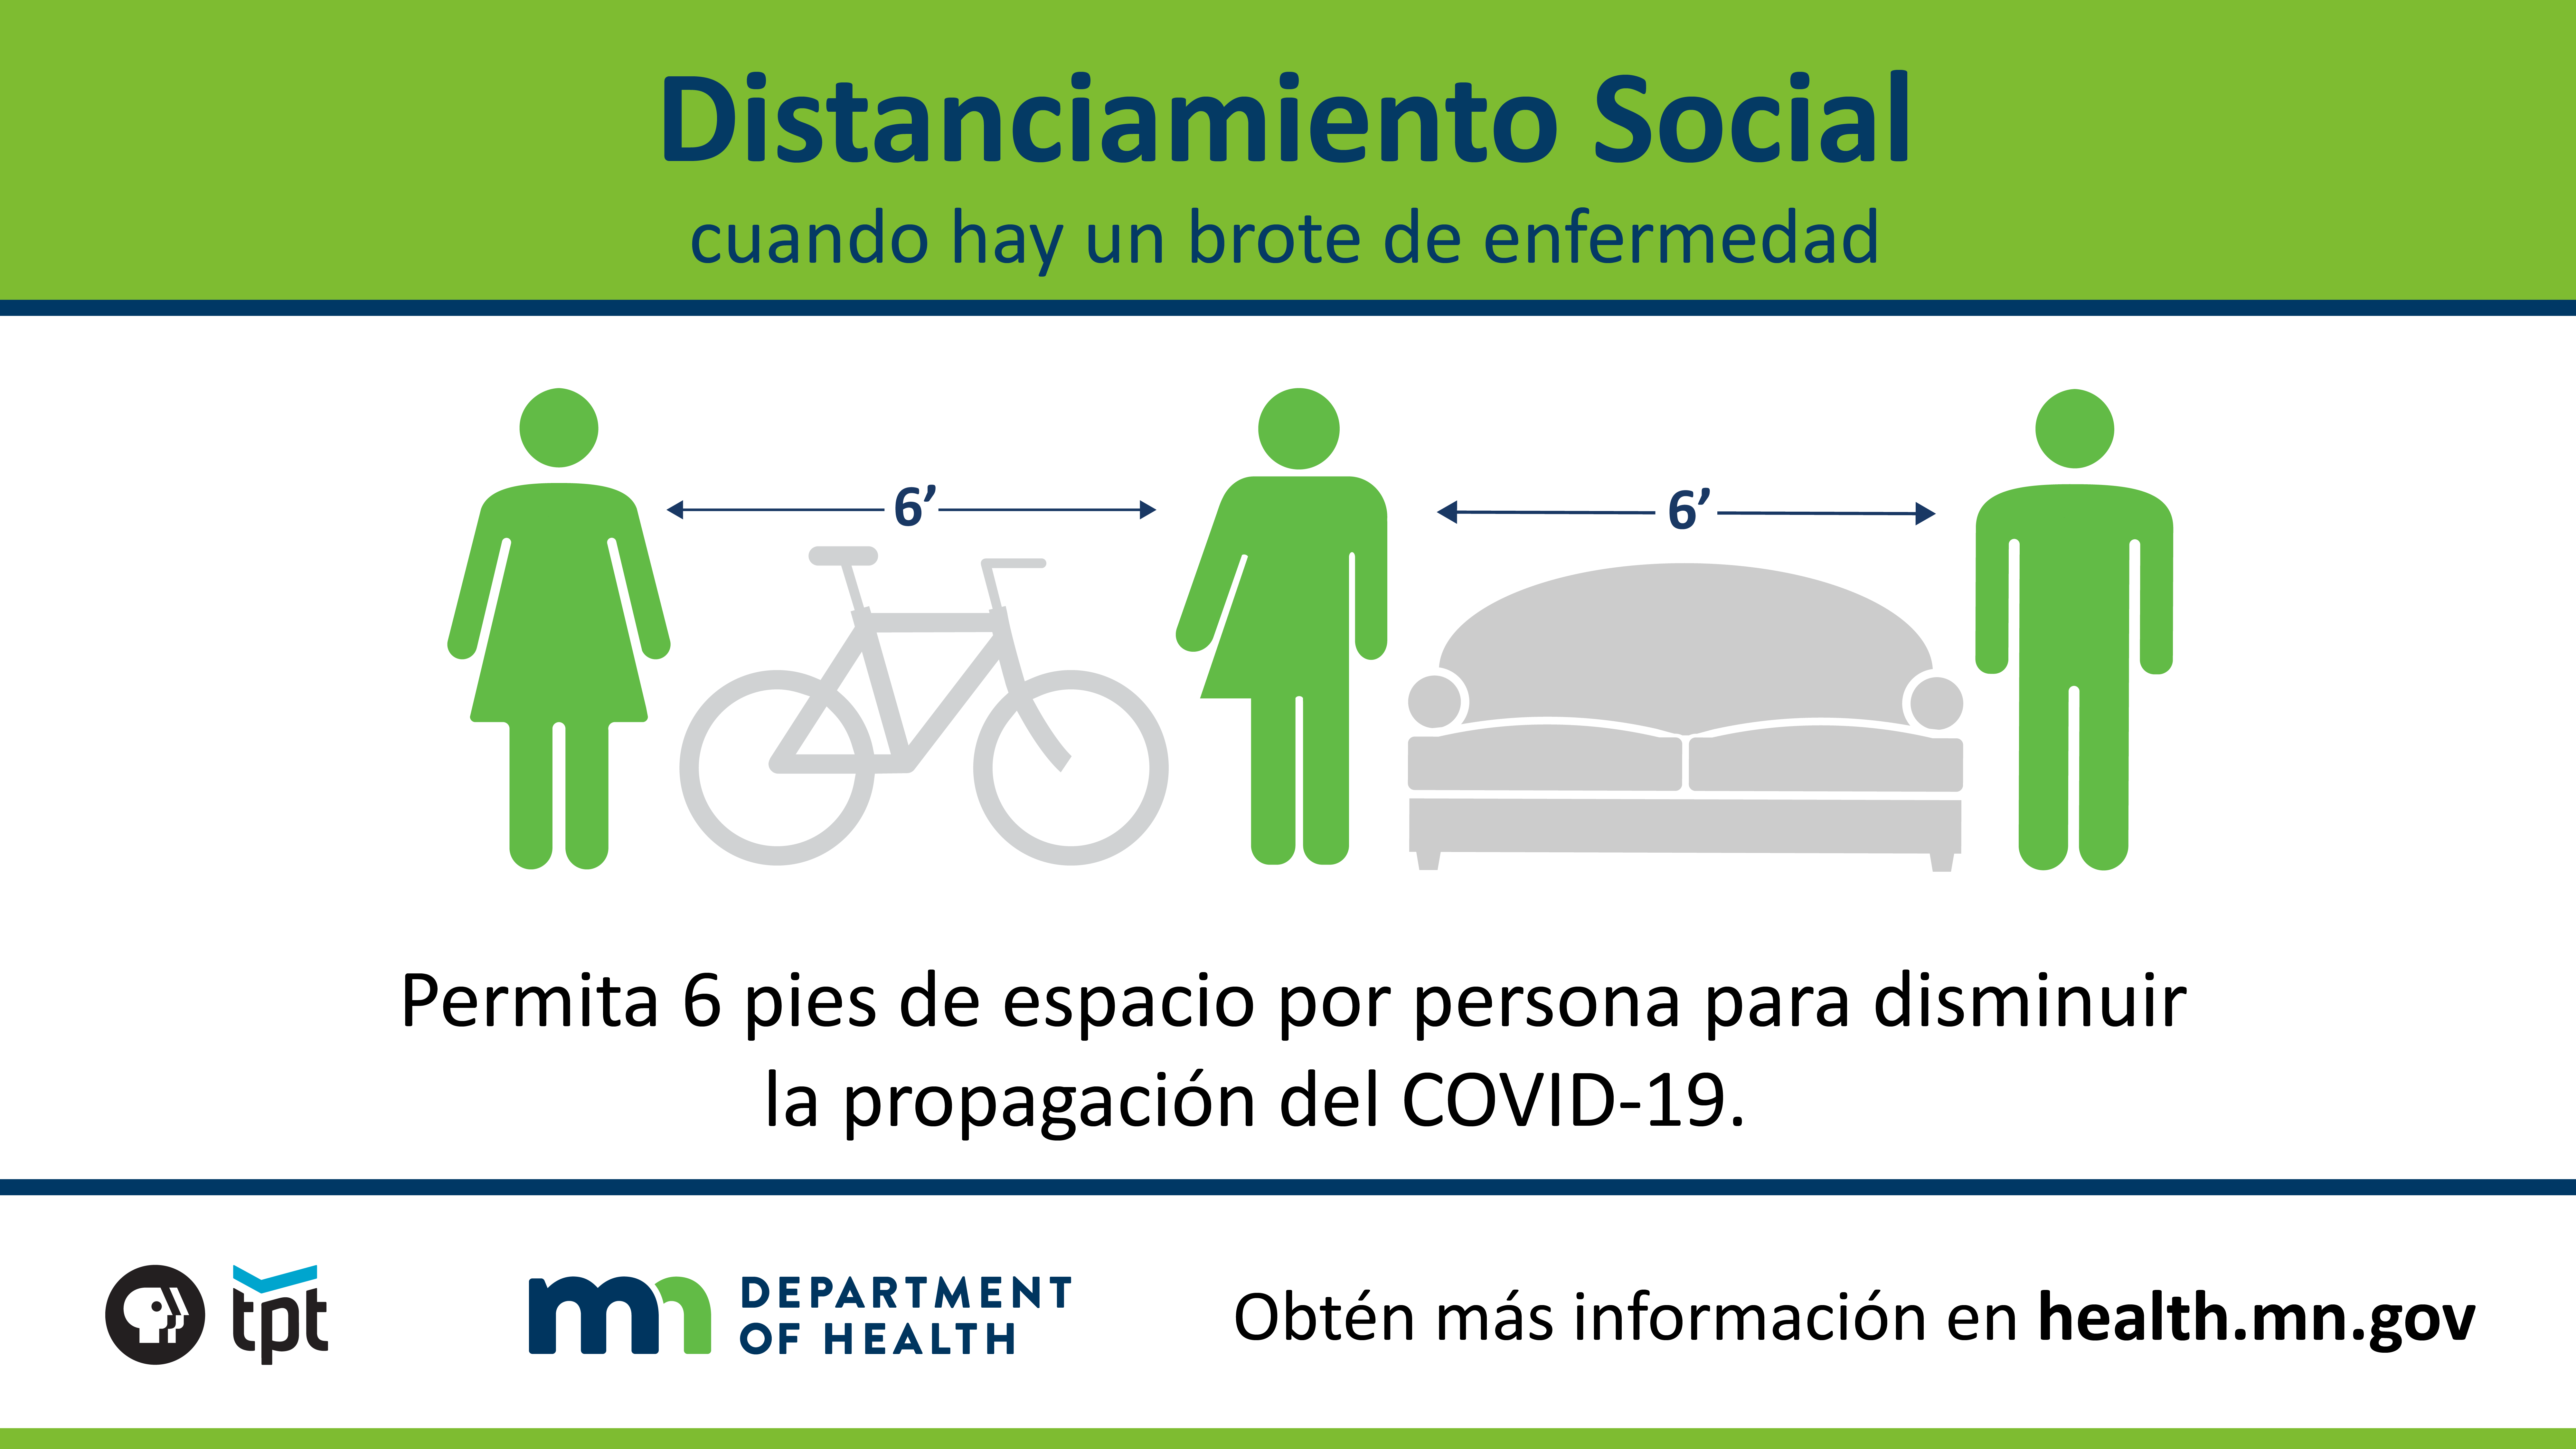 social distancing message in Spanish